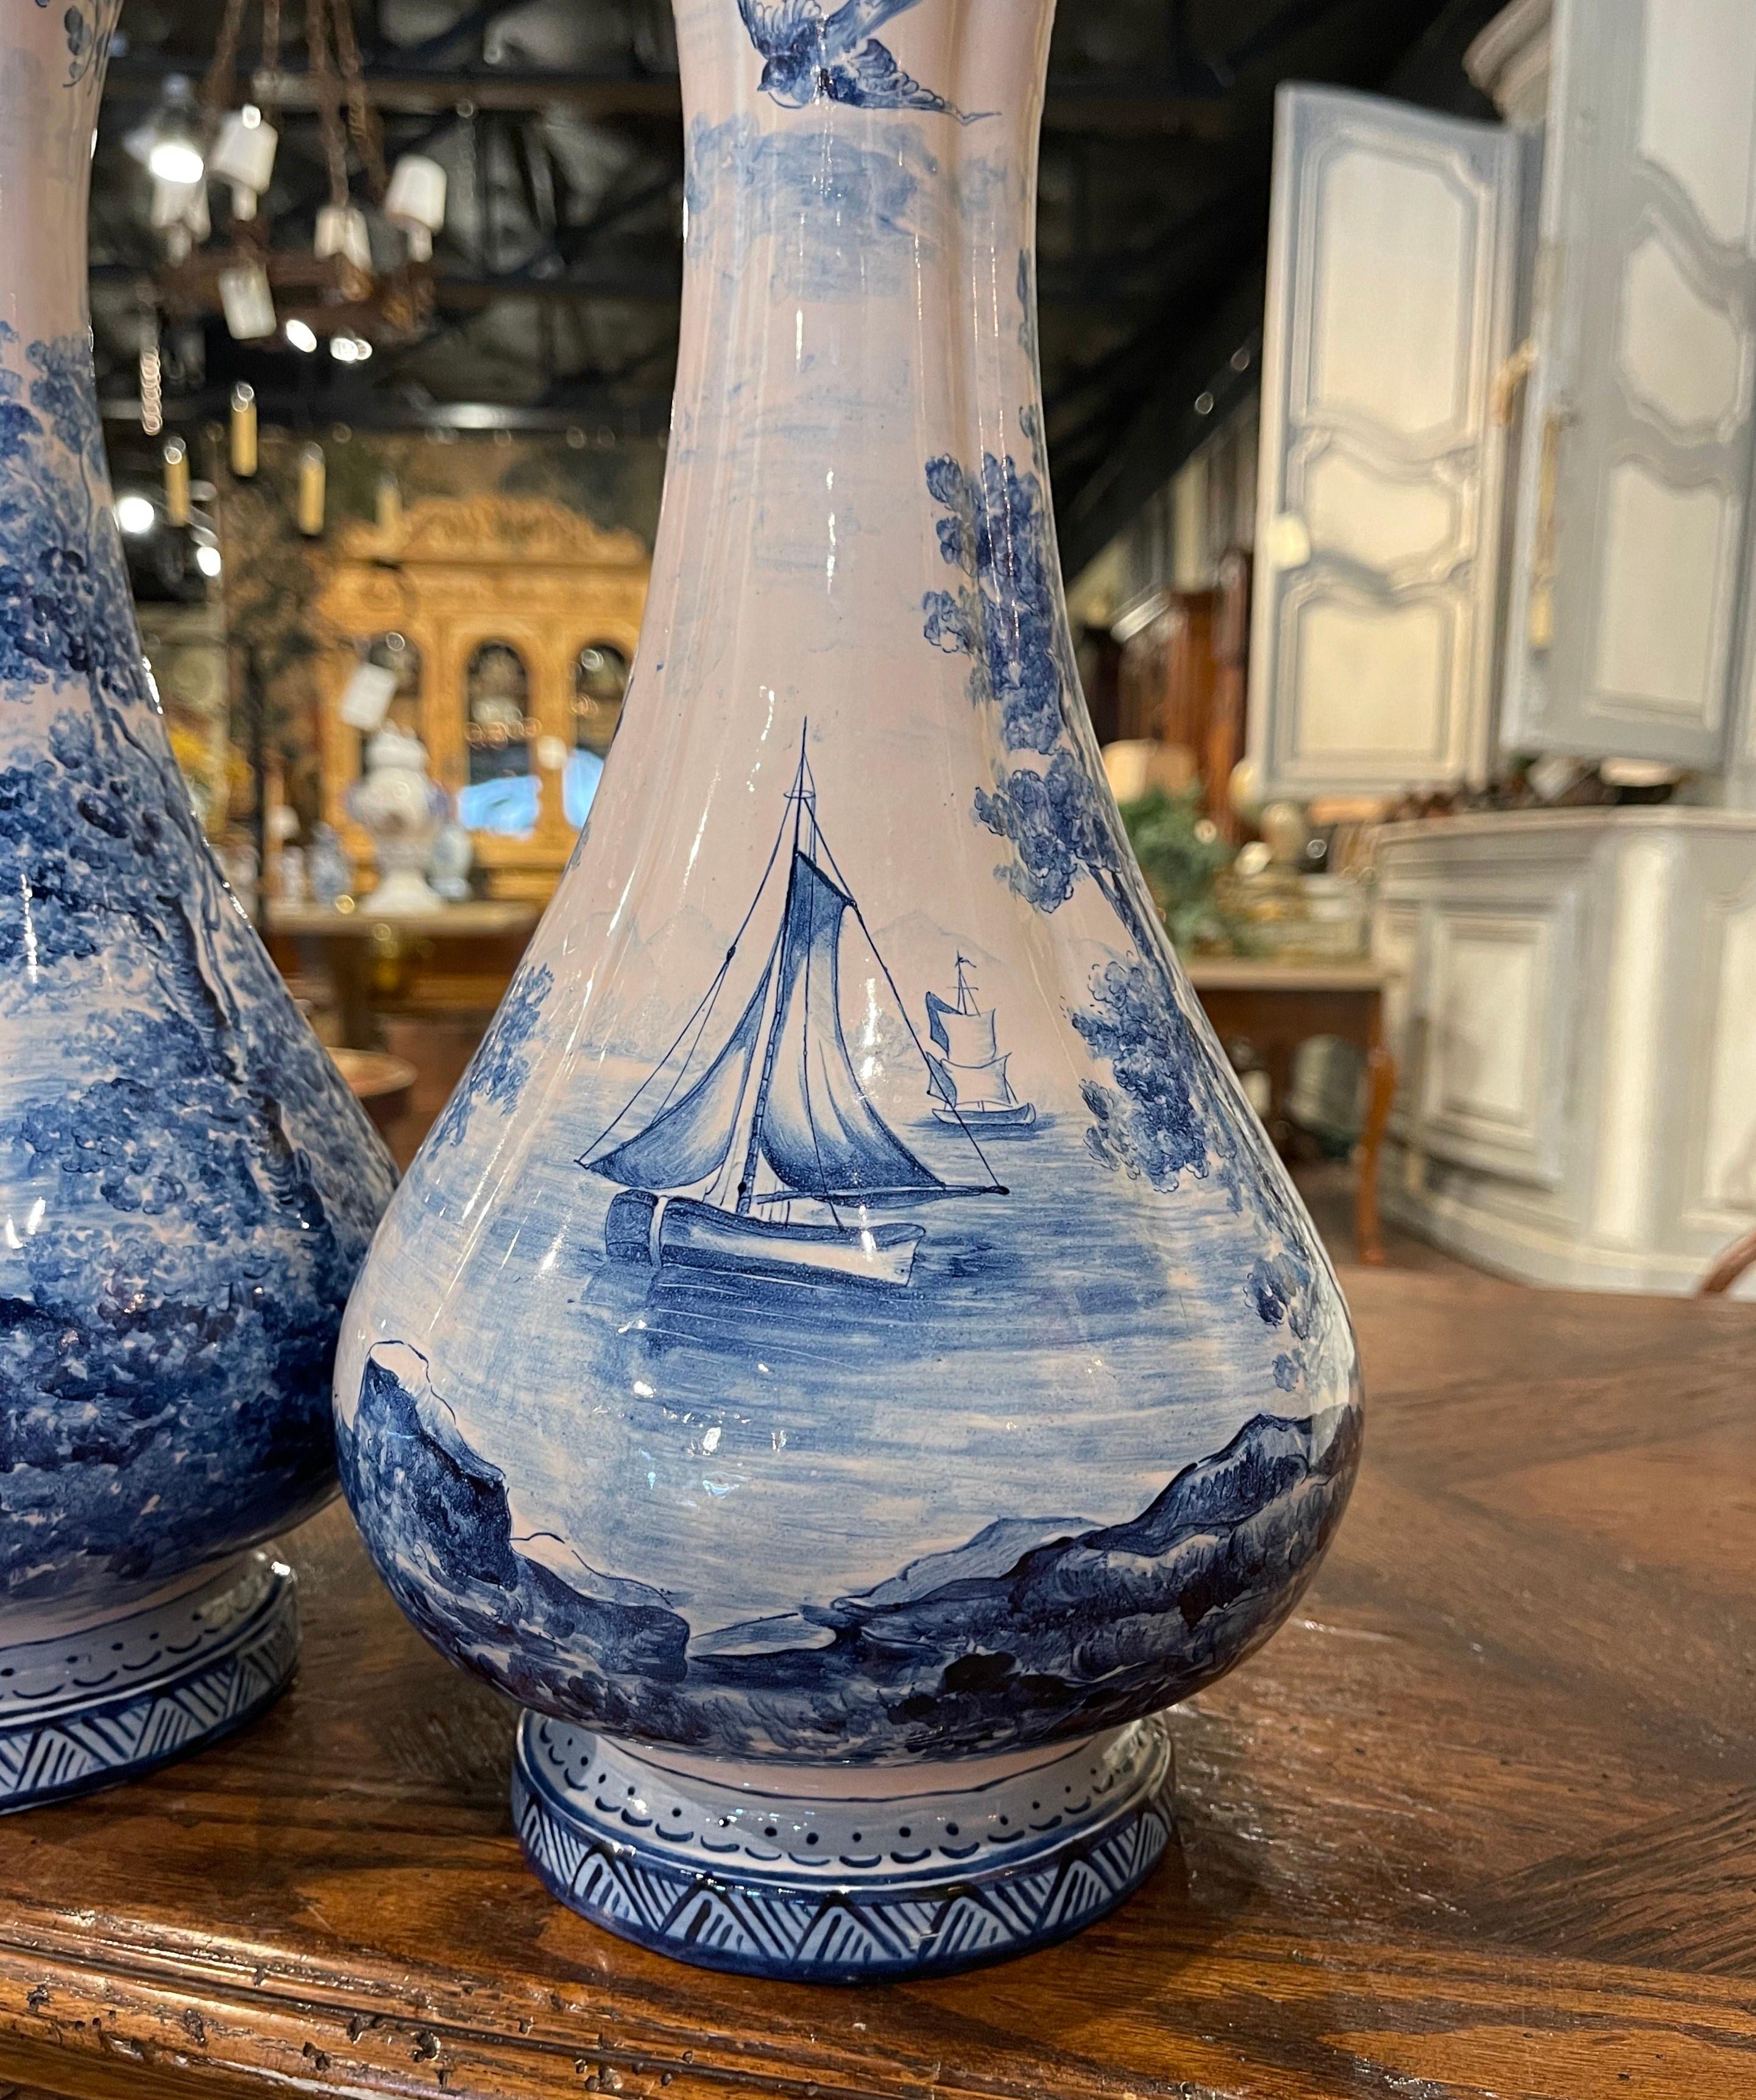 Pair of 19th Century French Delft Style Faience Vases with Blue and White Decor 9